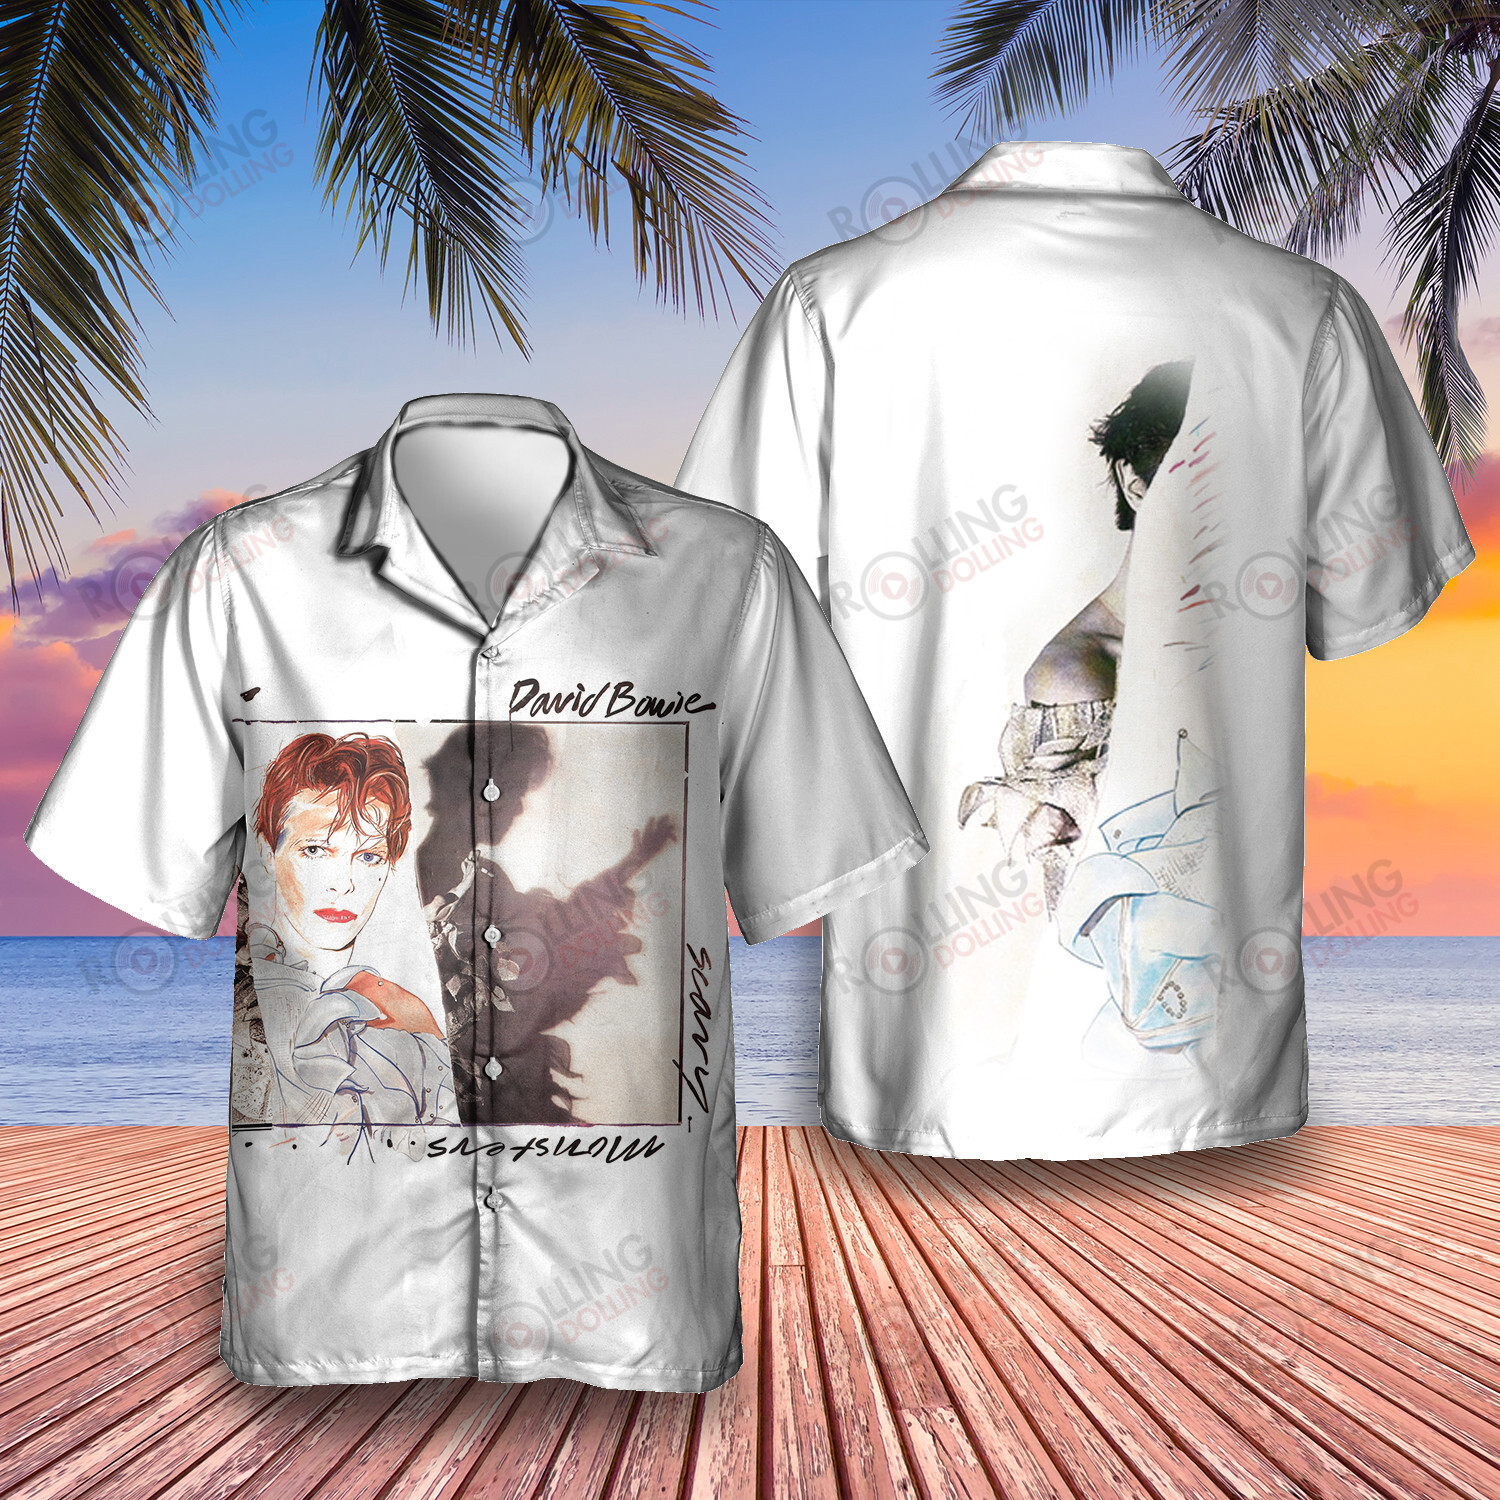 HOT David Bowie Scary Monsters Hawaii Shirt1